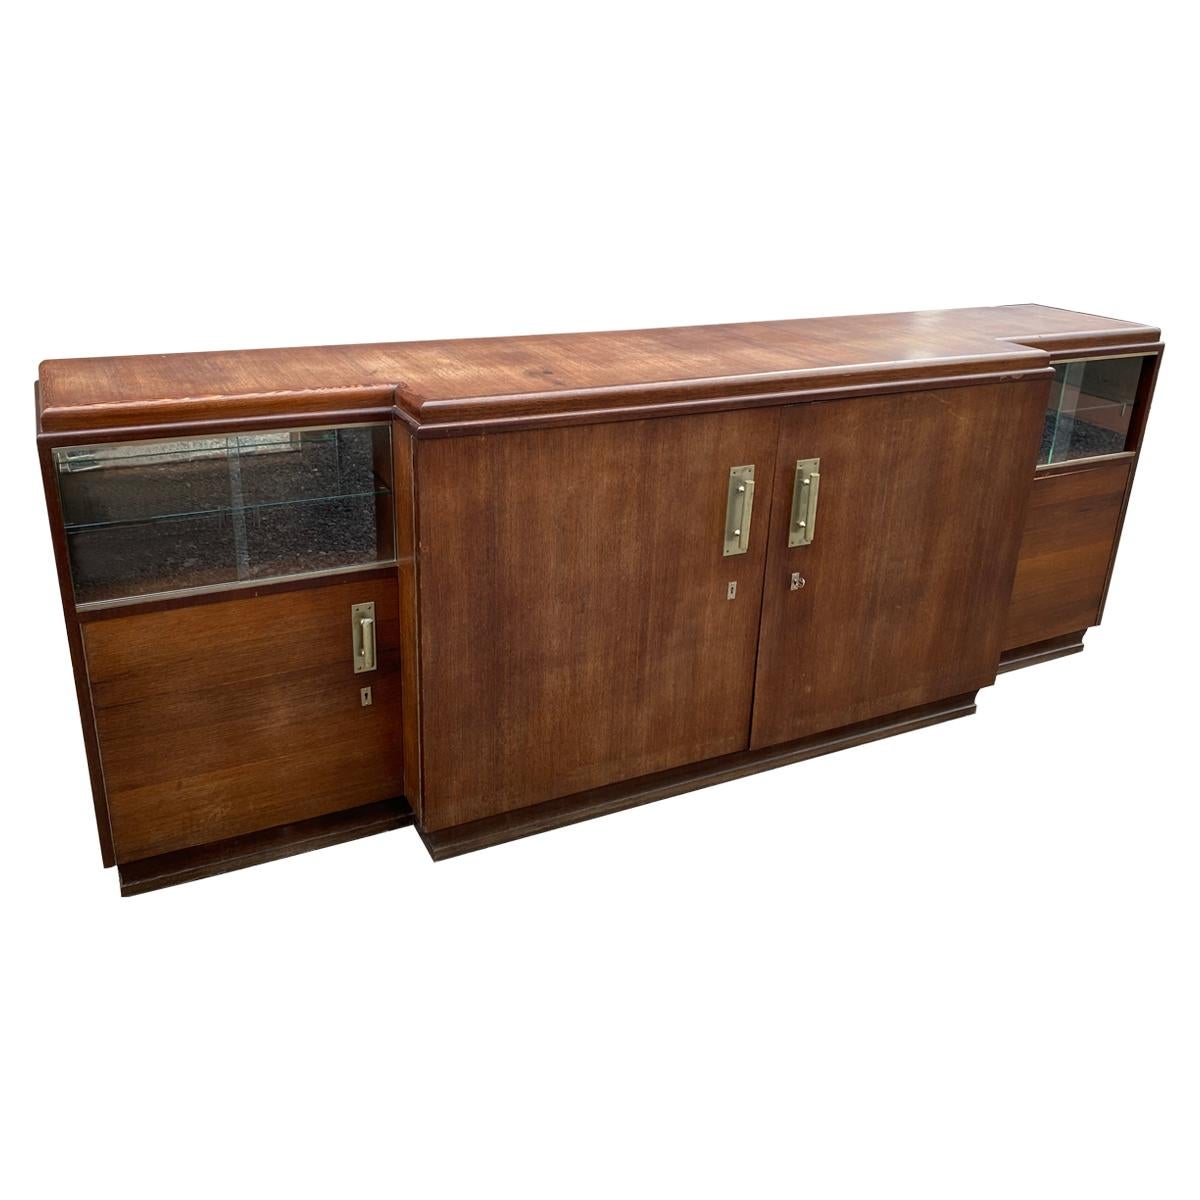 Large Art Deco Sideboard in Walnut, circa 1930 For Sale